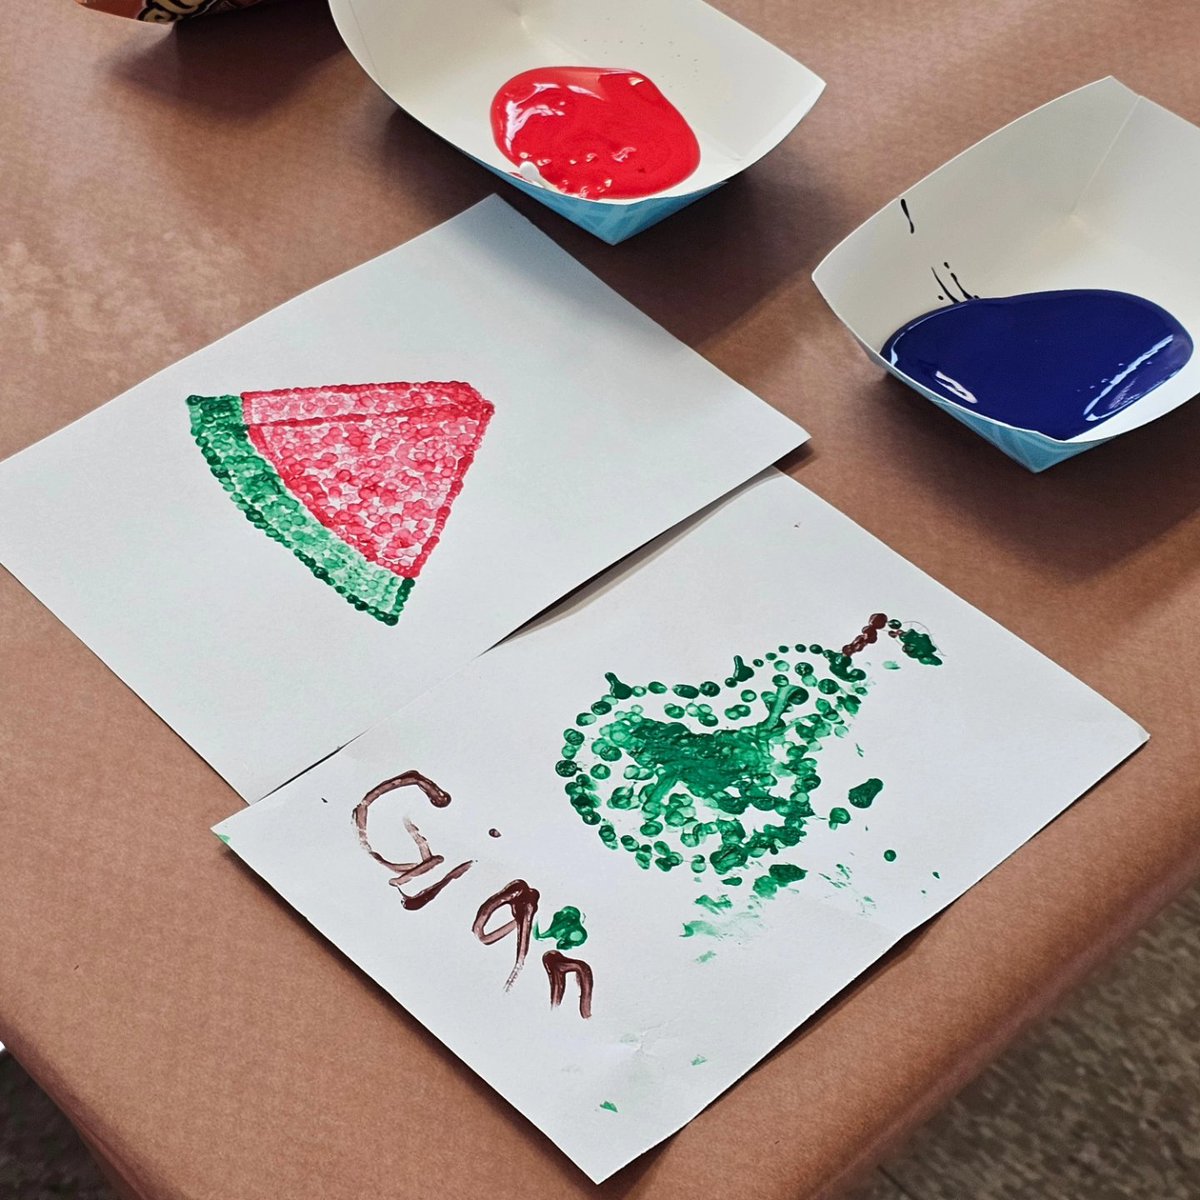 We had a wonderful Family Art Night at North Tamarind Elementary! Thanks to the teachers and families who joined us to create their pointillism masterpieces. #IBelieveinFUSD